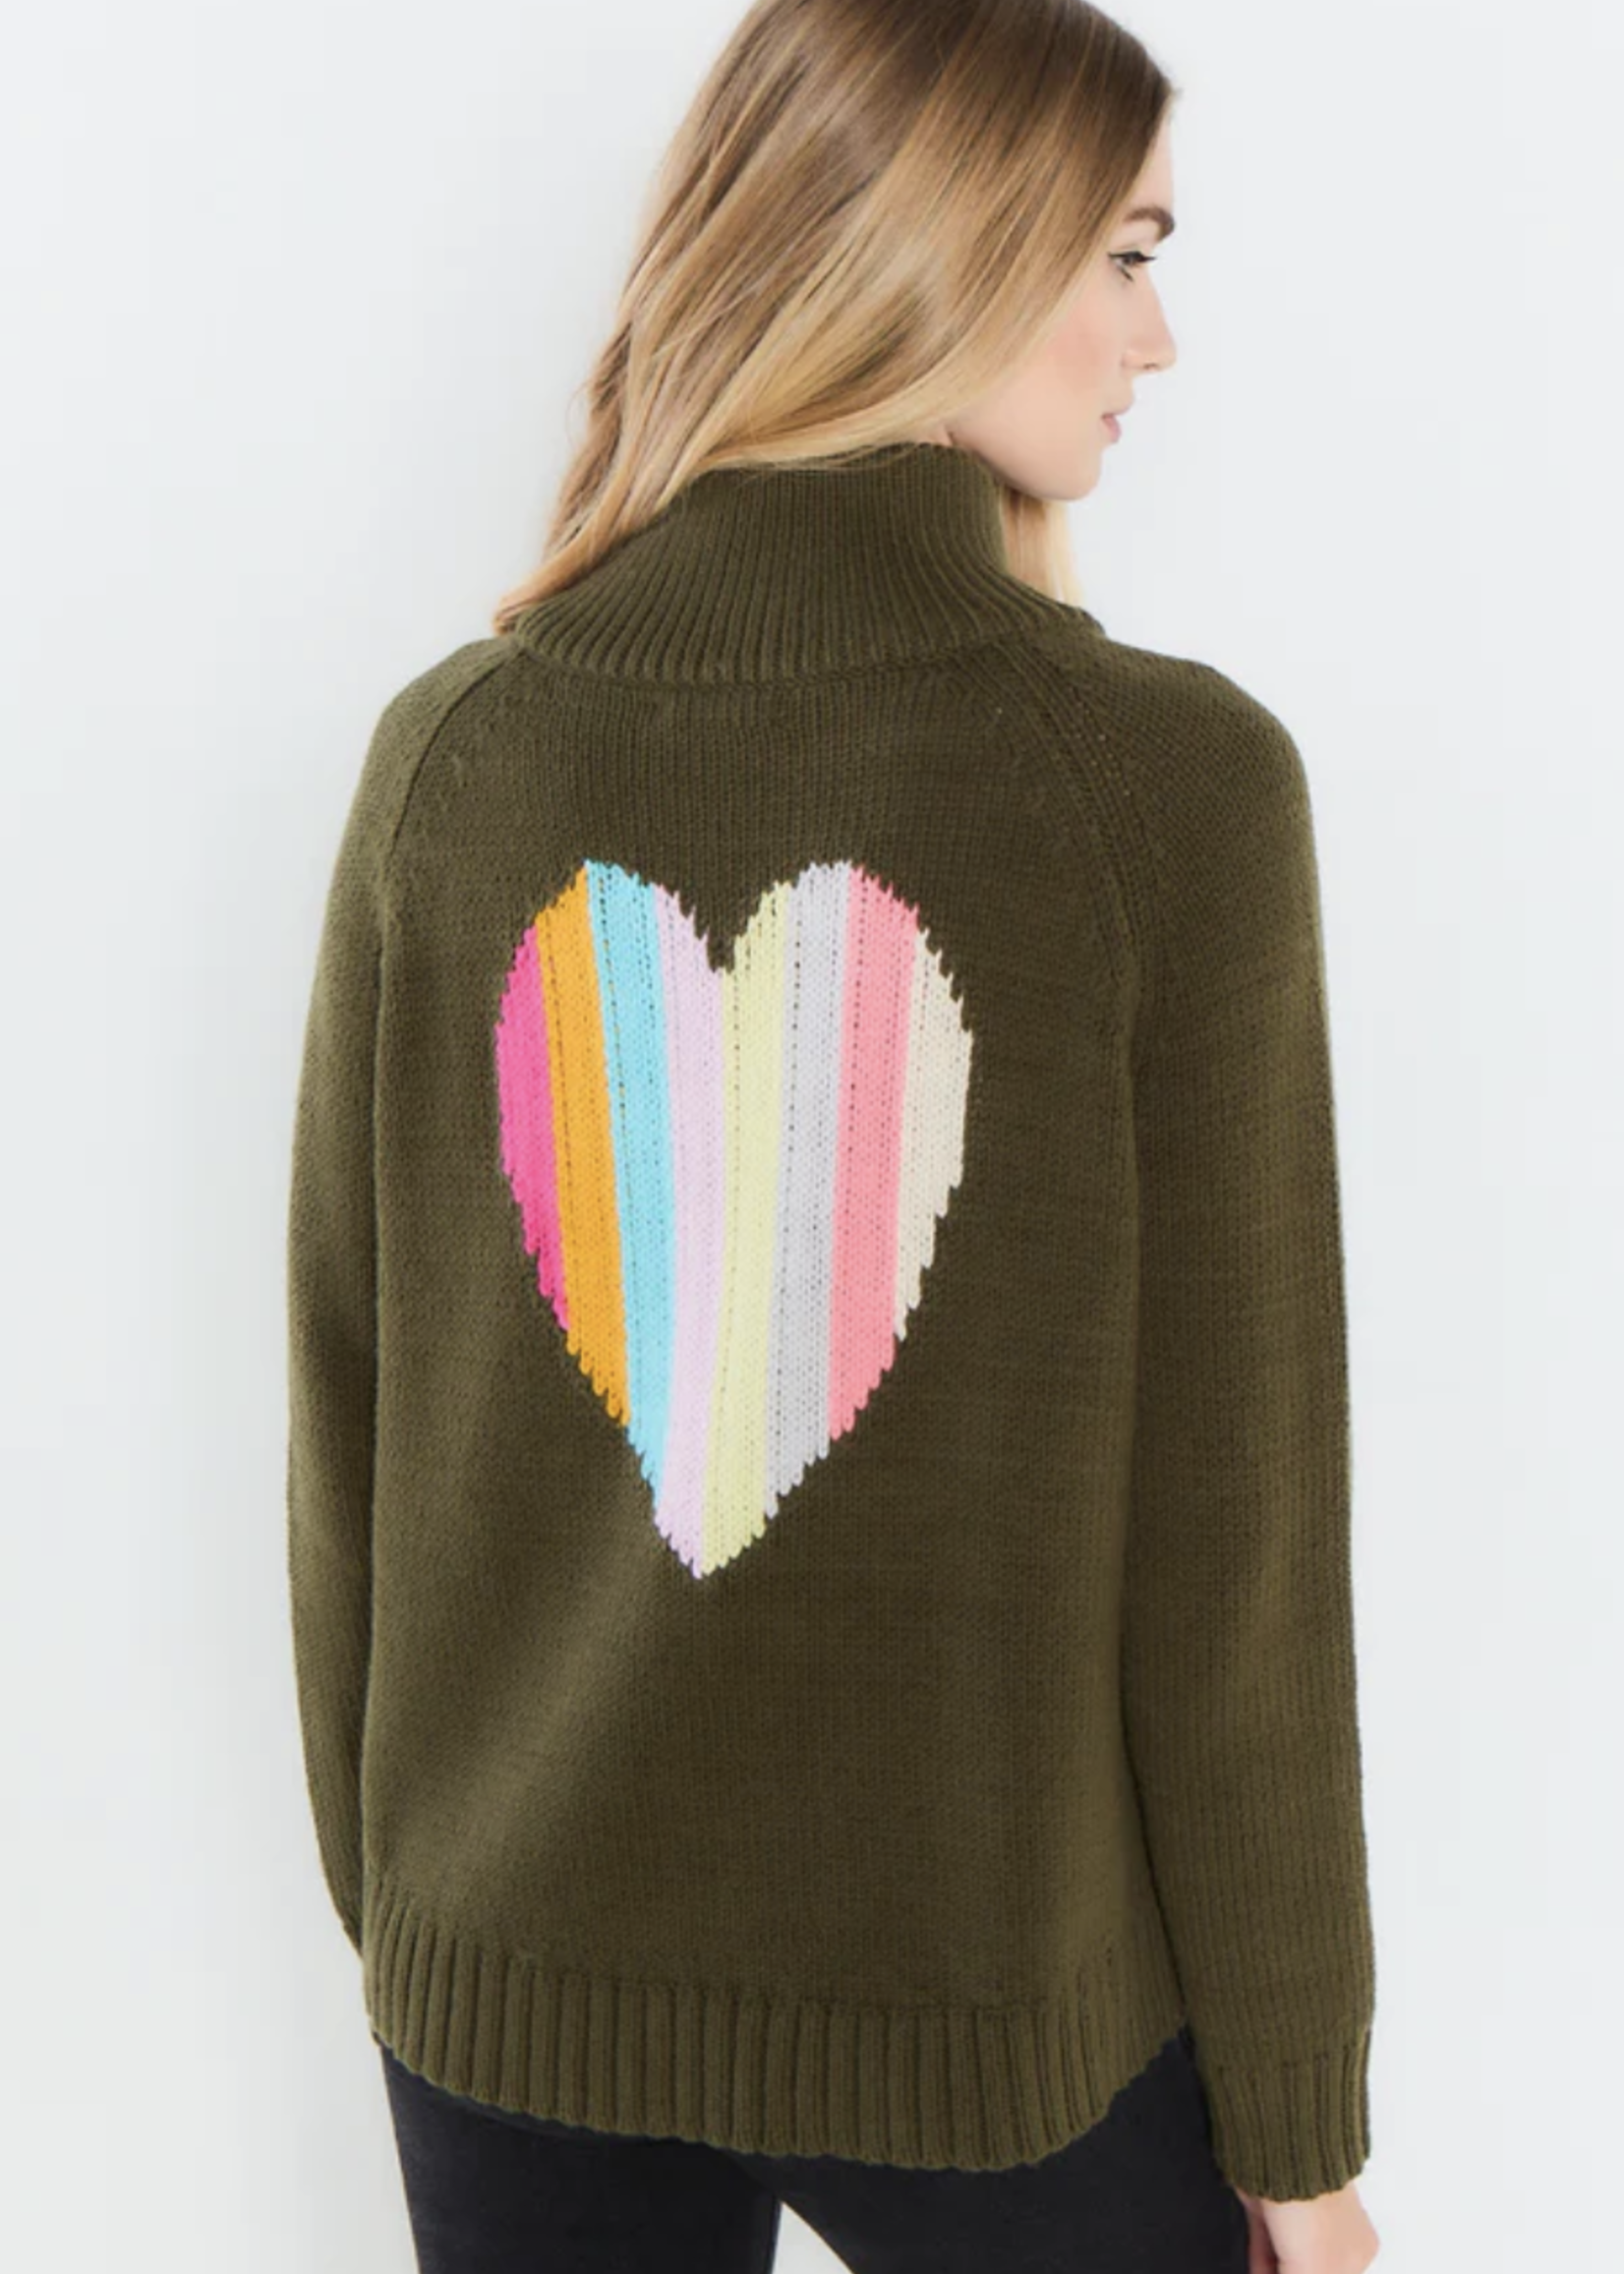 LISA TODD LOVE IS BACK SWEATER